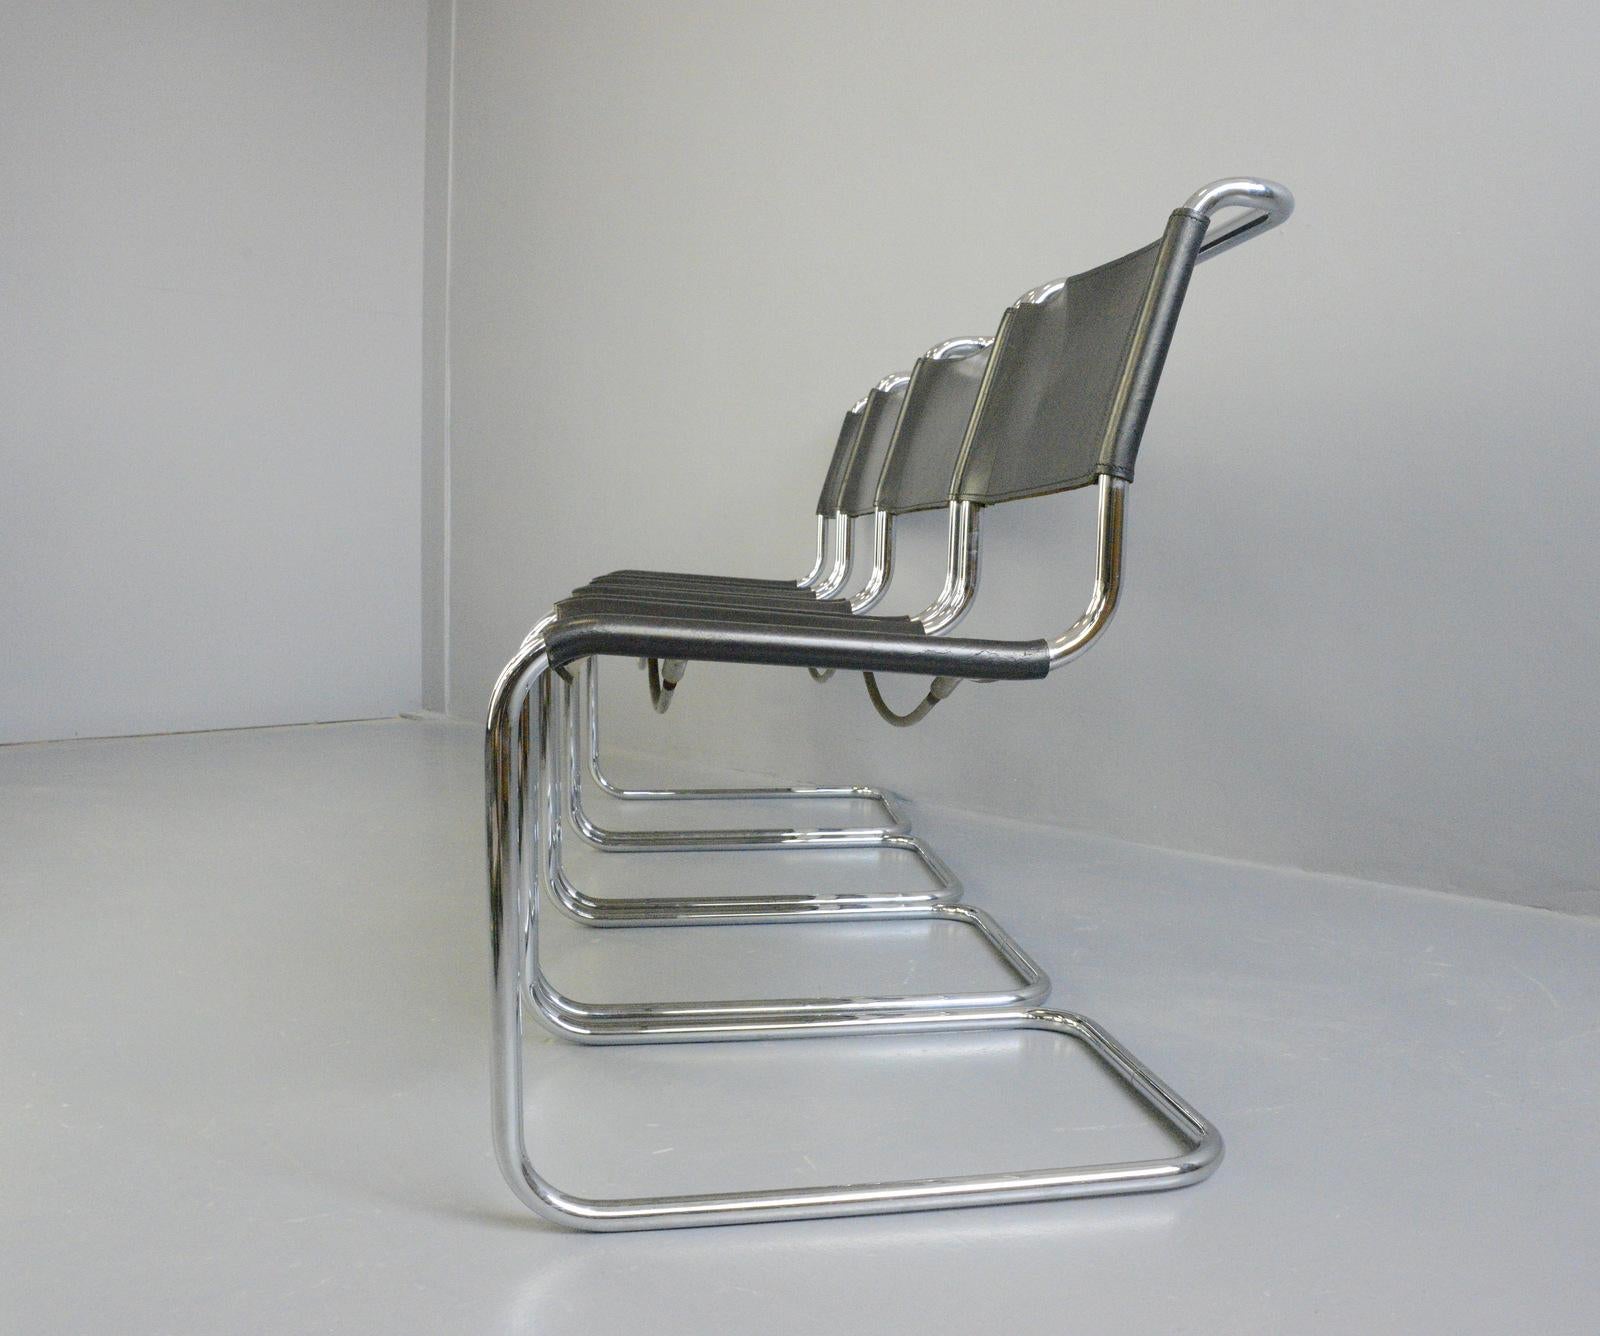 Bauhaus B33 chairs by Marcel Breuer for Thonet

- Price is for the set of 4 
- Chromed tubular steel frames
- Heavy black leather seats and back rests 
- Designed by Marcel Breuer
- Made by Thonet
- German ~ 1950s
- Measures: 52cm wide x